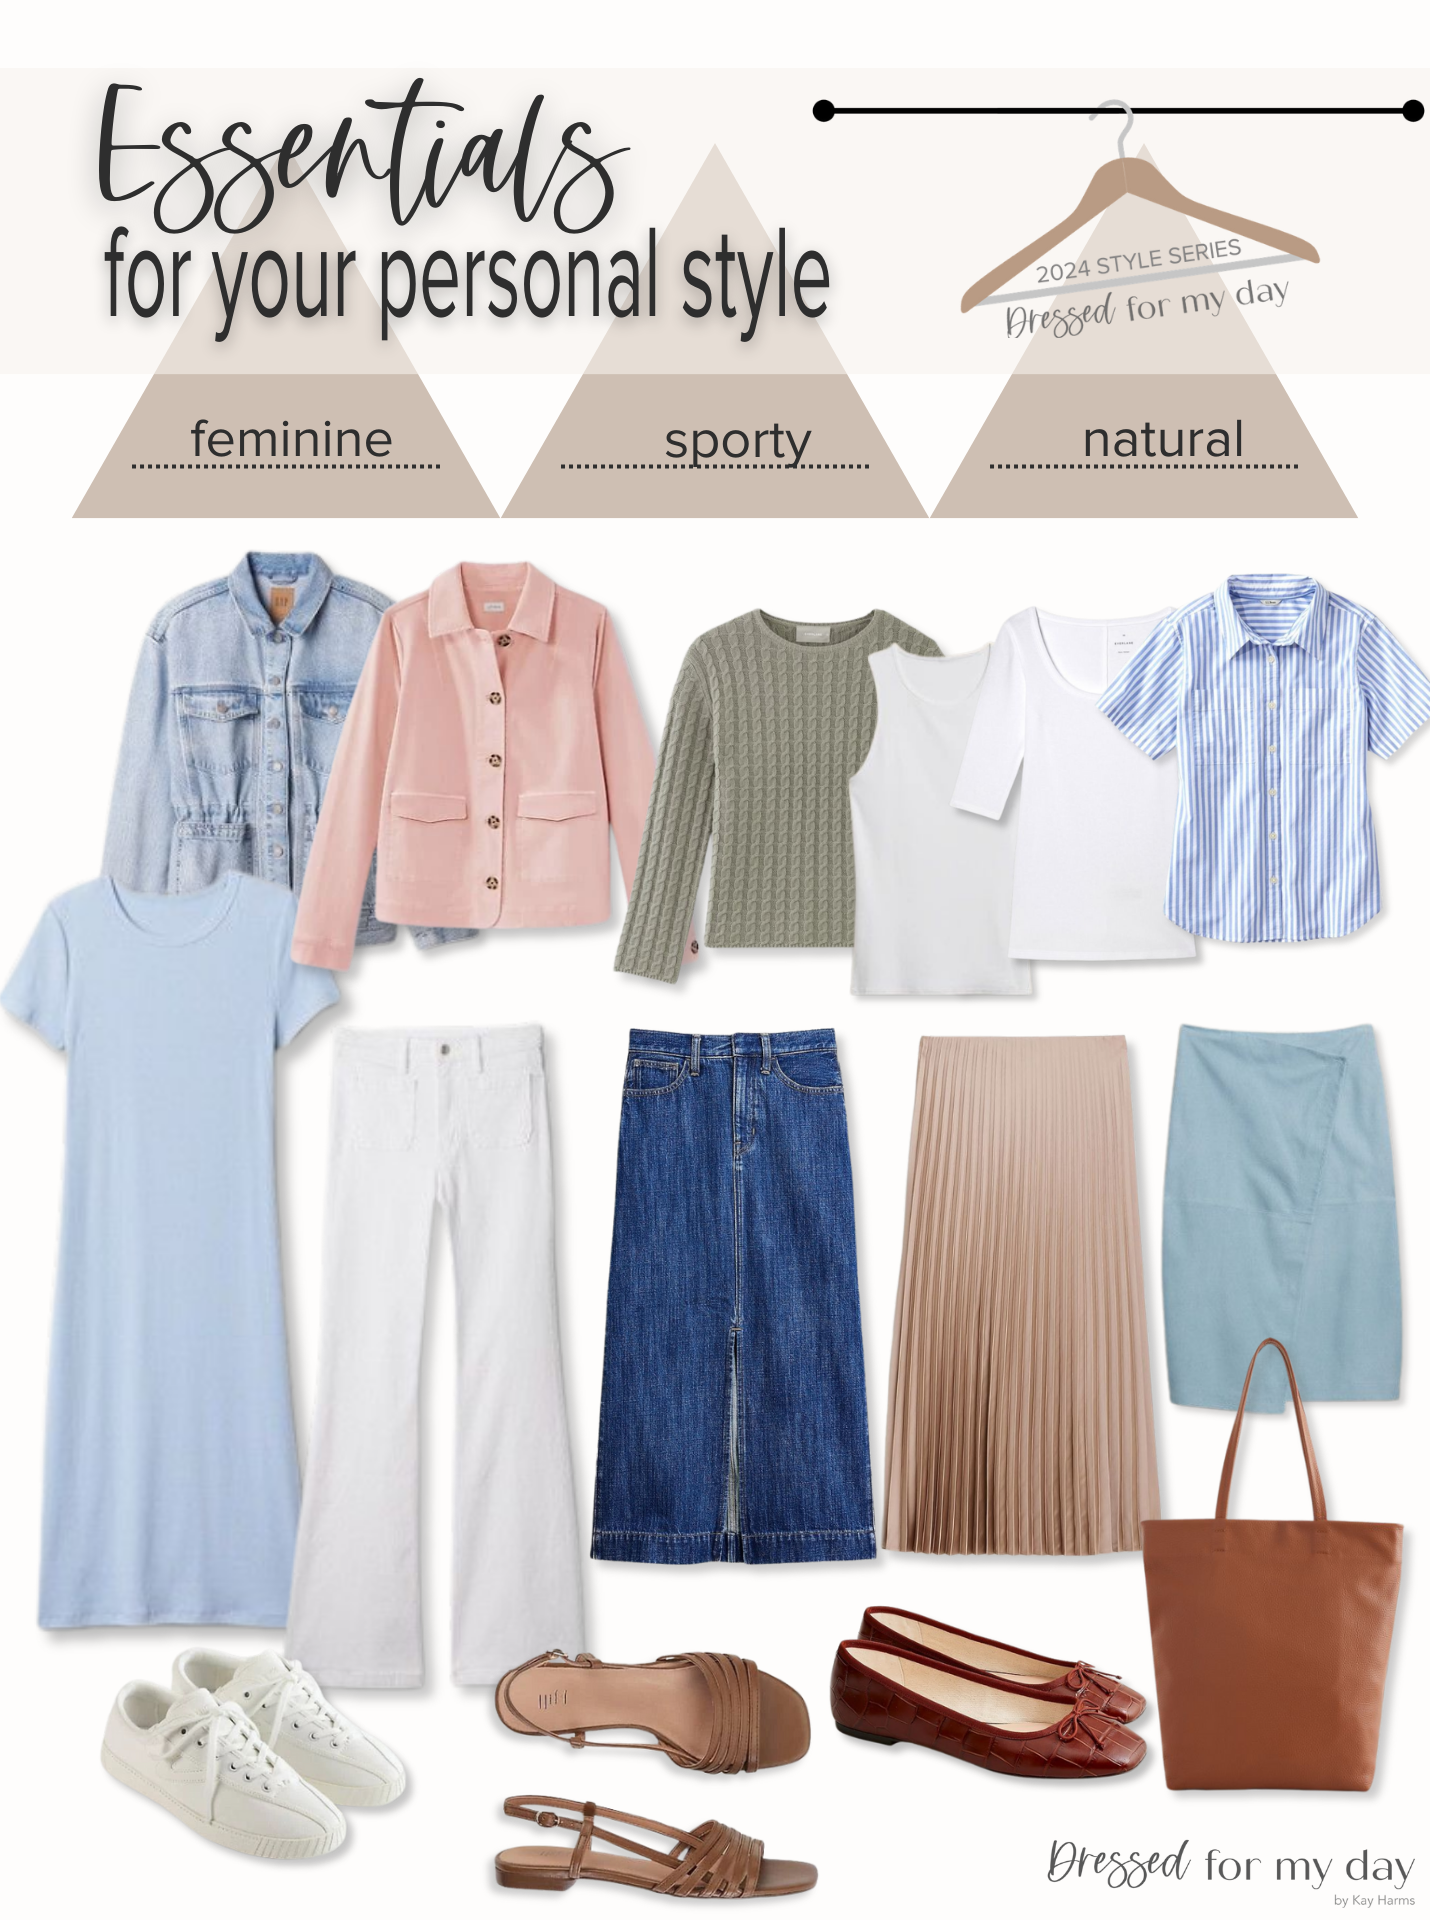 Essentials for Personal Styles 1 (4)